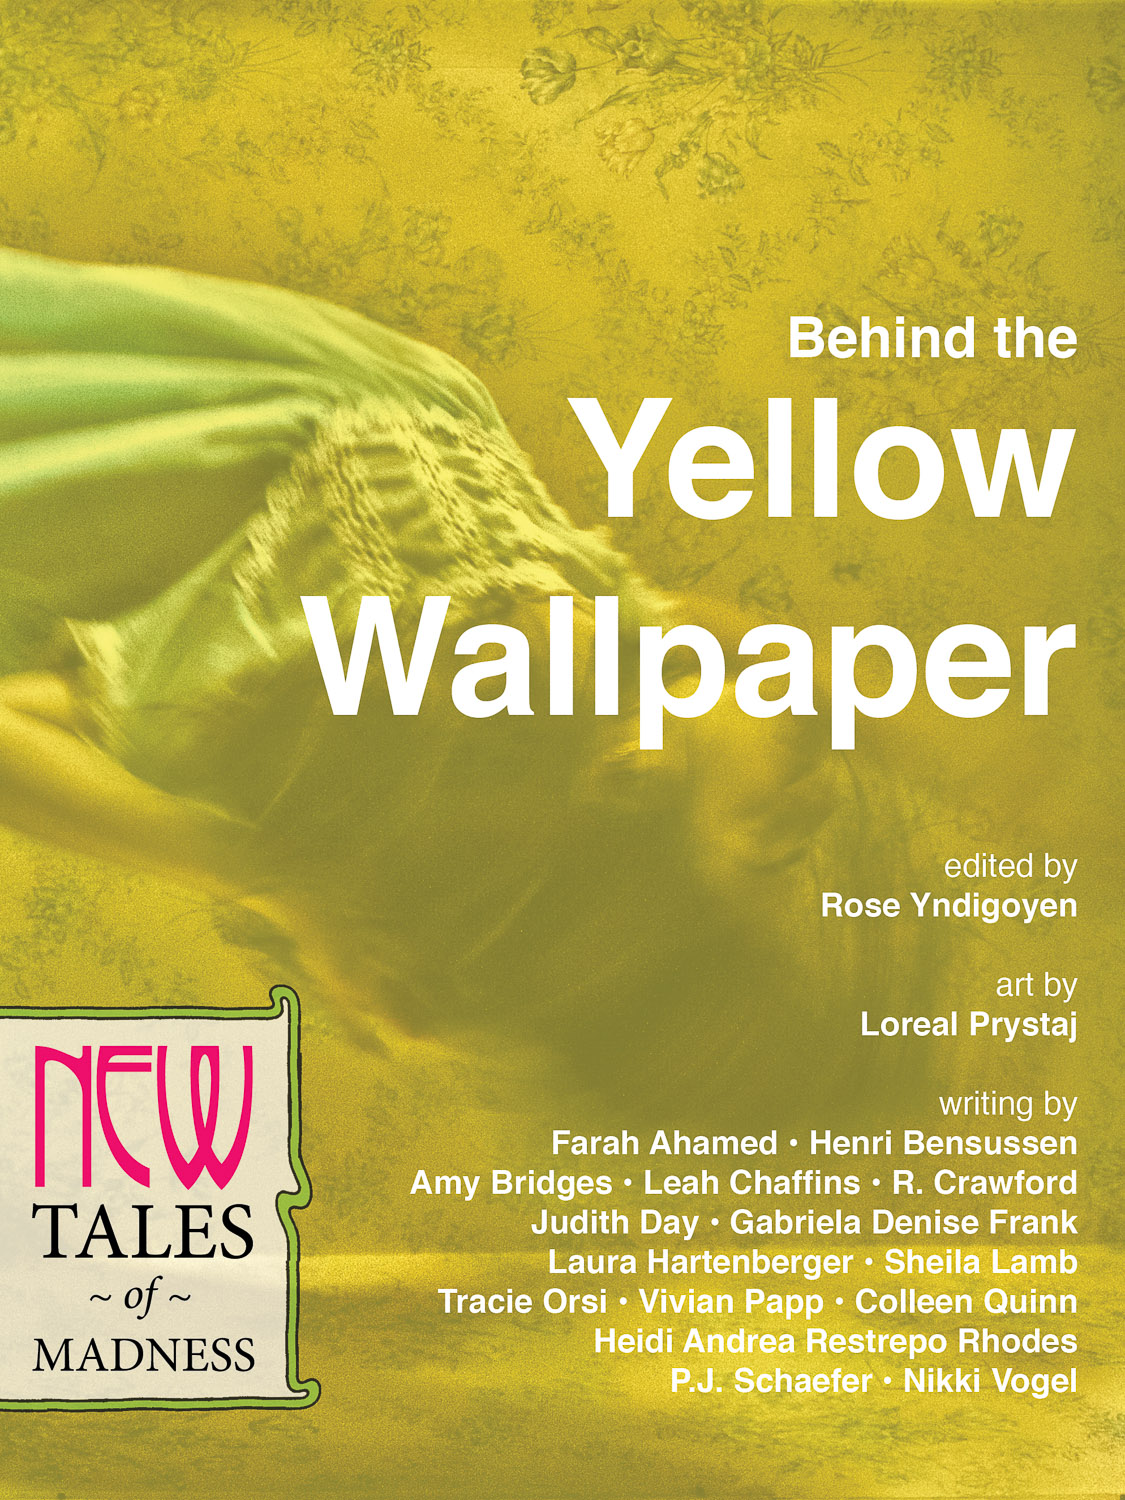 The Yellow Wallpaper Quotes Tato Roona